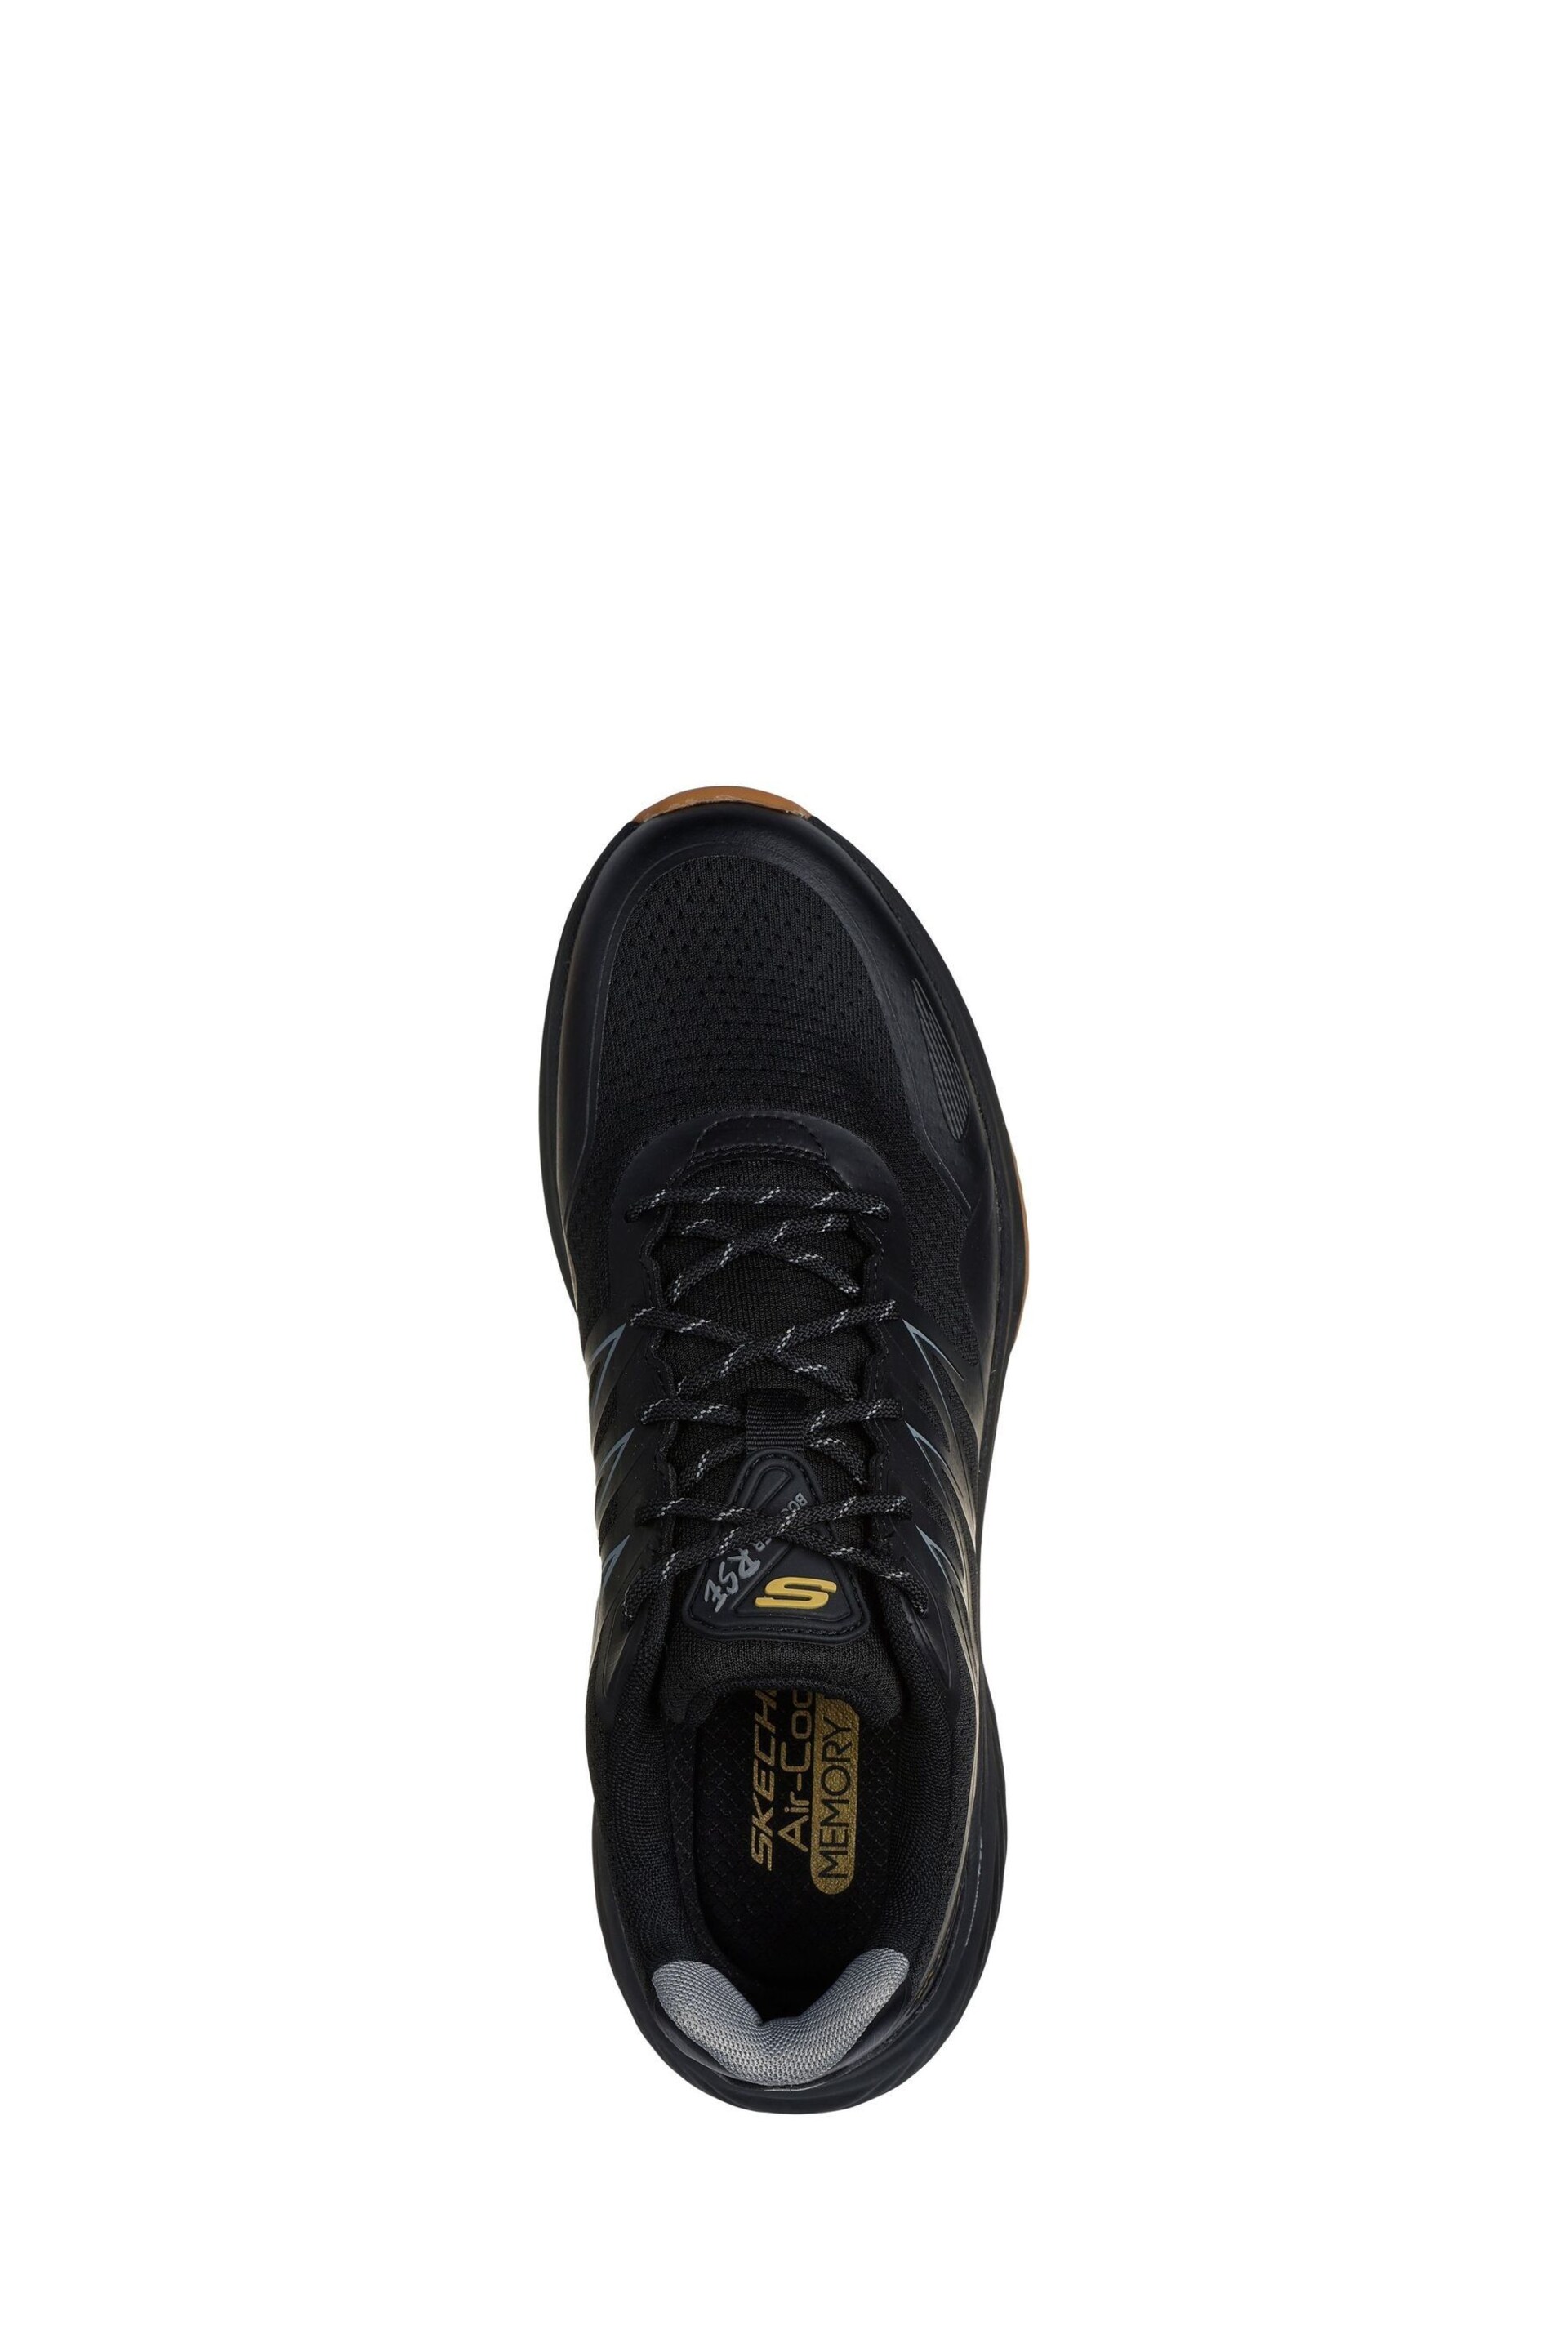 Skechers Black Bounder Trainers - Image 4 of 5